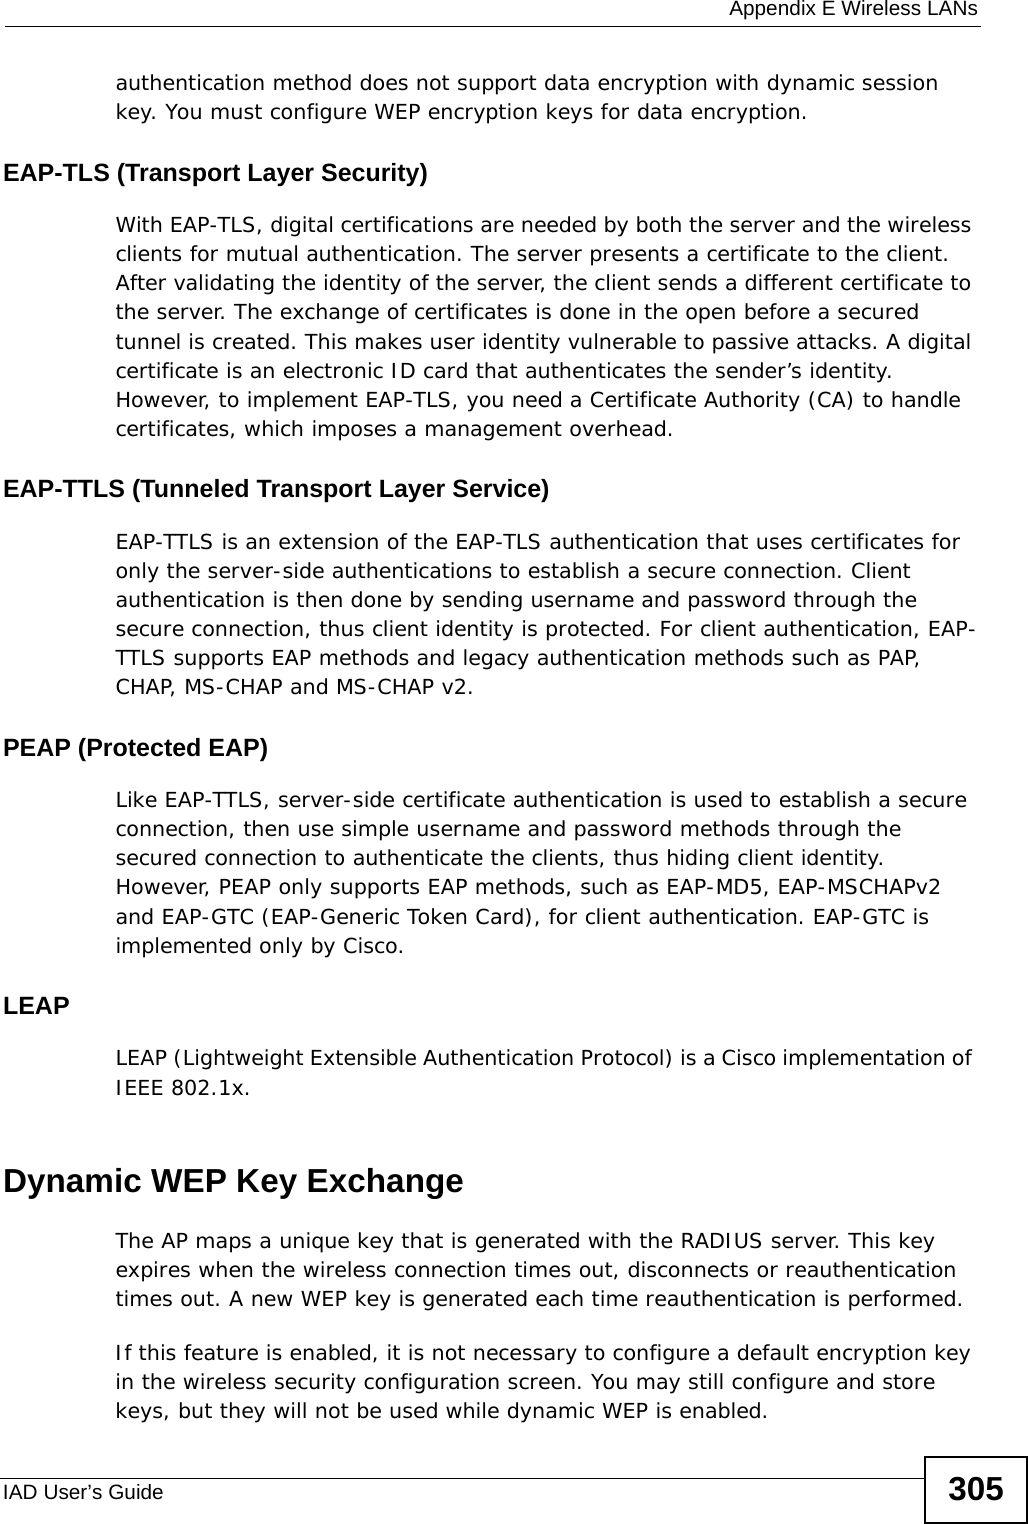  Appendix E Wireless LANsIAD User’s Guide 305authentication method does not support data encryption with dynamic session key. You must configure WEP encryption keys for data encryption. EAP-TLS (Transport Layer Security)With EAP-TLS, digital certifications are needed by both the server and the wireless clients for mutual authentication. The server presents a certificate to the client. After validating the identity of the server, the client sends a different certificate to the server. The exchange of certificates is done in the open before a secured tunnel is created. This makes user identity vulnerable to passive attacks. A digital certificate is an electronic ID card that authenticates the sender’s identity. However, to implement EAP-TLS, you need a Certificate Authority (CA) to handle certificates, which imposes a management overhead. EAP-TTLS (Tunneled Transport Layer Service) EAP-TTLS is an extension of the EAP-TLS authentication that uses certificates for only the server-side authentications to establish a secure connection. Client authentication is then done by sending username and password through the secure connection, thus client identity is protected. For client authentication, EAP-TTLS supports EAP methods and legacy authentication methods such as PAP, CHAP, MS-CHAP and MS-CHAP v2. PEAP (Protected EAP)   Like EAP-TTLS, server-side certificate authentication is used to establish a secure connection, then use simple username and password methods through the secured connection to authenticate the clients, thus hiding client identity. However, PEAP only supports EAP methods, such as EAP-MD5, EAP-MSCHAPv2 and EAP-GTC (EAP-Generic Token Card), for client authentication. EAP-GTC is implemented only by Cisco.LEAPLEAP (Lightweight Extensible Authentication Protocol) is a Cisco implementation of IEEE 802.1x. Dynamic WEP Key ExchangeThe AP maps a unique key that is generated with the RADIUS server. This key expires when the wireless connection times out, disconnects or reauthentication times out. A new WEP key is generated each time reauthentication is performed.If this feature is enabled, it is not necessary to configure a default encryption key in the wireless security configuration screen. You may still configure and store keys, but they will not be used while dynamic WEP is enabled.